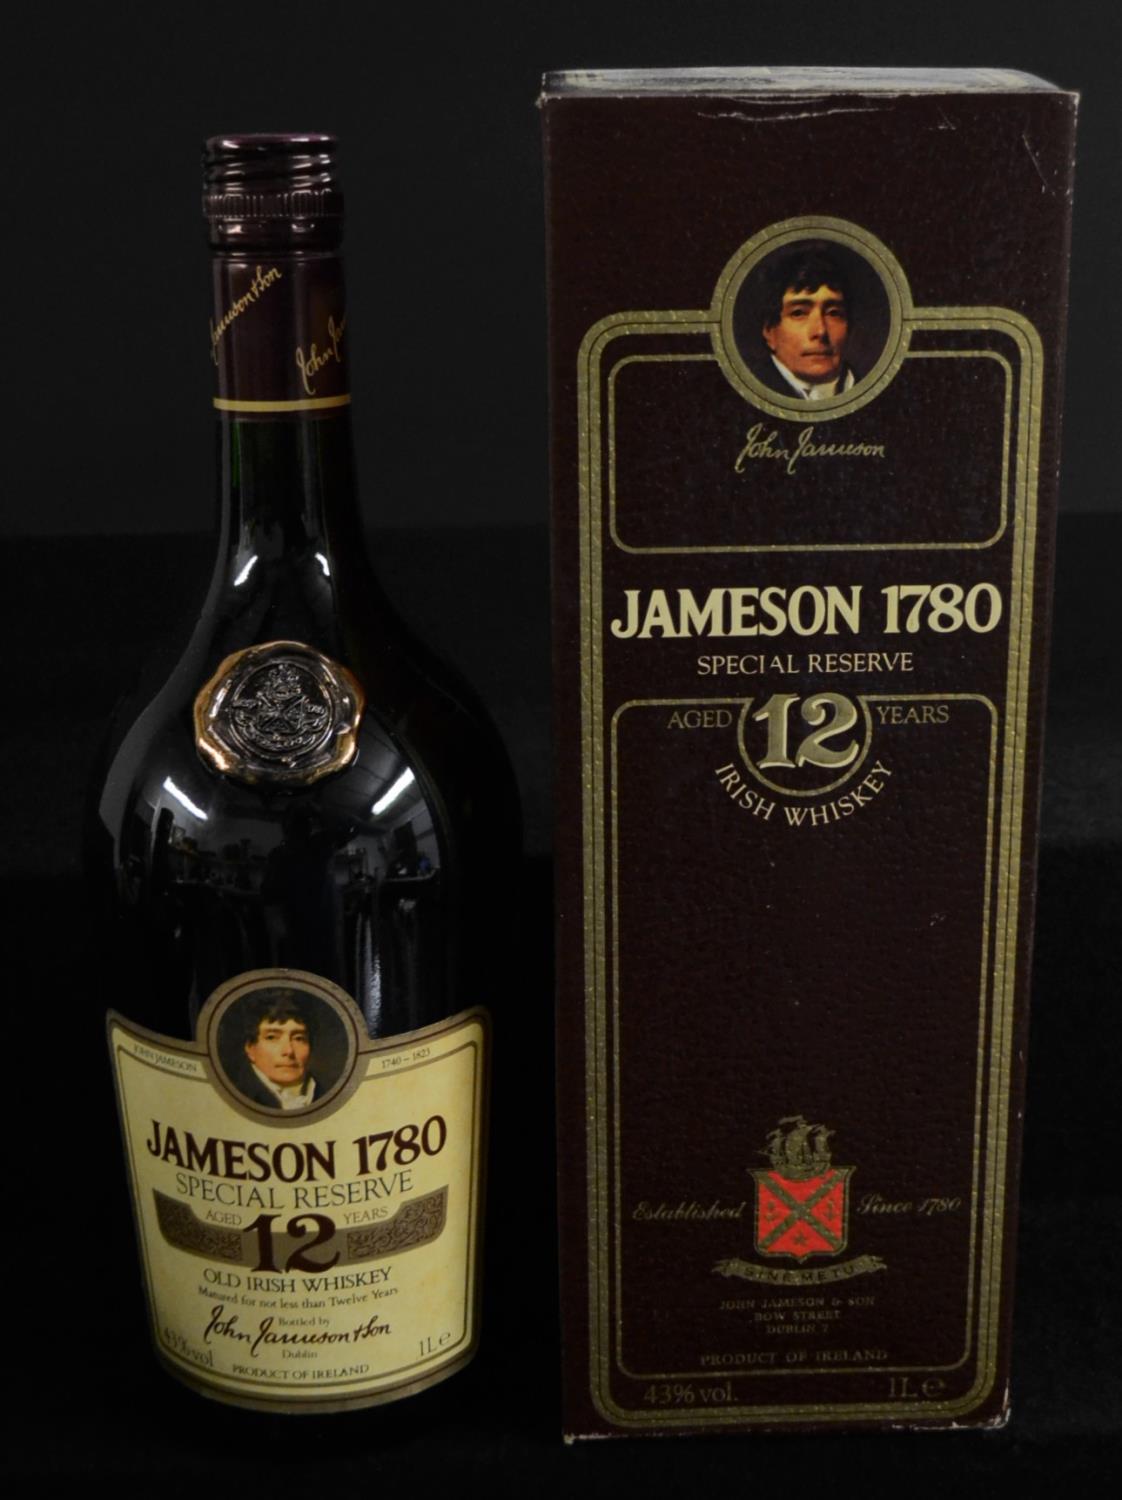 Whisky - Jameson 1780 Special Reserve Aged 12 Years Old Irish Whiskey, 43%, 1l, - Image 3 of 3